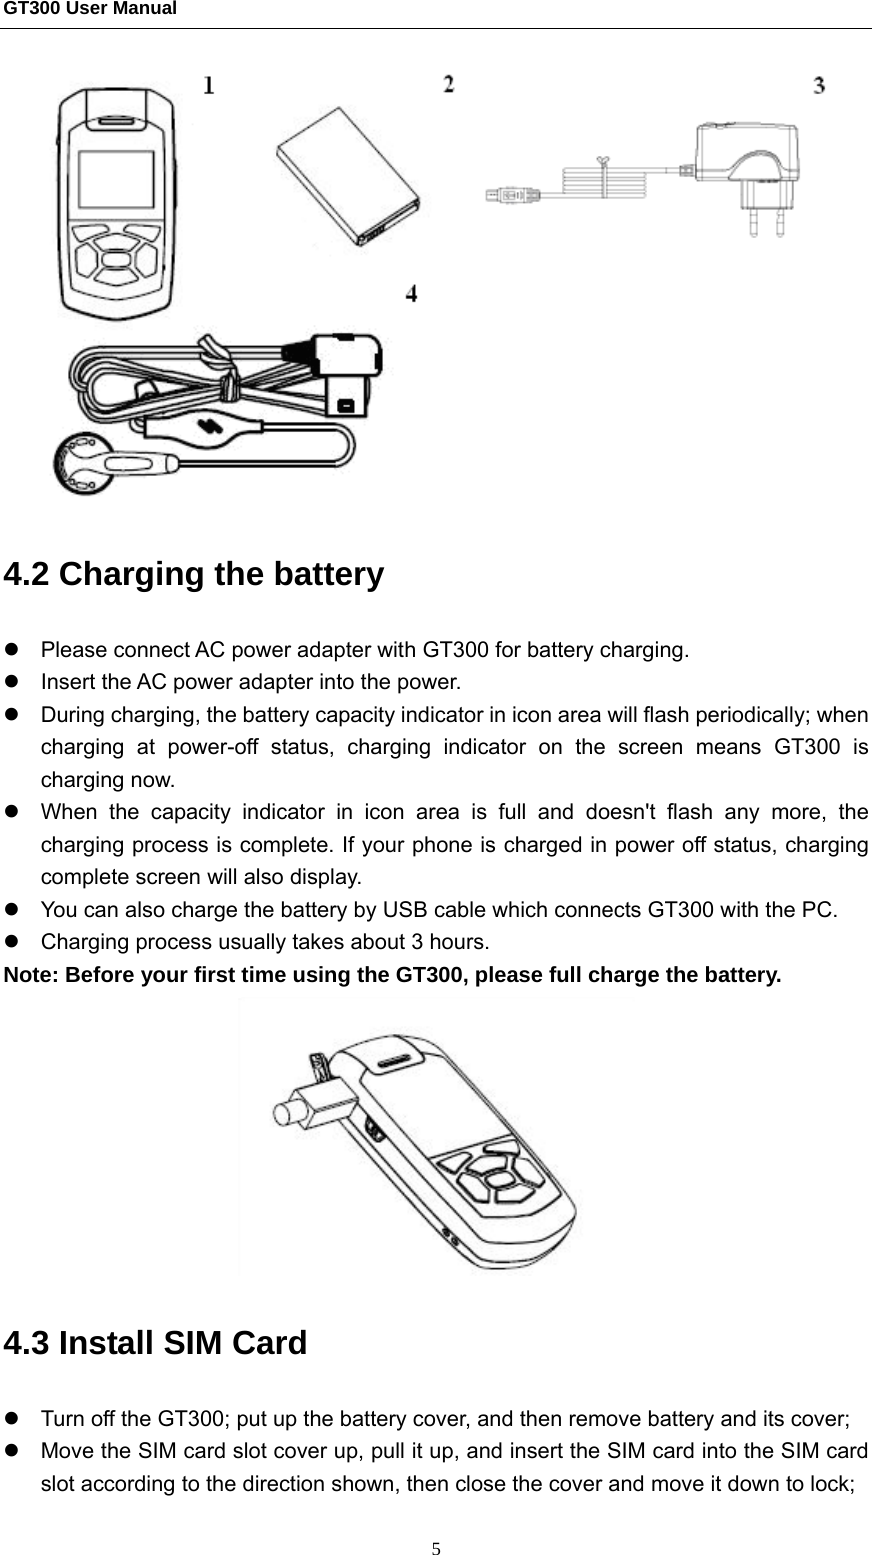 GT300 User Manual                                                  5  4.2 Charging the battery   z  Please connect AC power adapter with GT300 for battery charging. z  Insert the AC power adapter into the power.   z  During charging, the battery capacity indicator in icon area will flash periodically; when charging at power-off status, charging indicator on the screen means GT300 is charging now.   z  When the capacity indicator in icon area is full and doesn&apos;t flash any more, the charging process is complete. If your phone is charged in power off status, charging complete screen will also display.   z  You can also charge the battery by USB cable which connects GT300 with the PC. z  Charging process usually takes about 3 hours. Note: Before your first time using the GT300, please full charge the battery.  4.3 Install SIM Card   z  Turn off the GT300; put up the battery cover, and then remove battery and its cover; z  Move the SIM card slot cover up, pull it up, and insert the SIM card into the SIM card slot according to the direction shown, then close the cover and move it down to lock; 